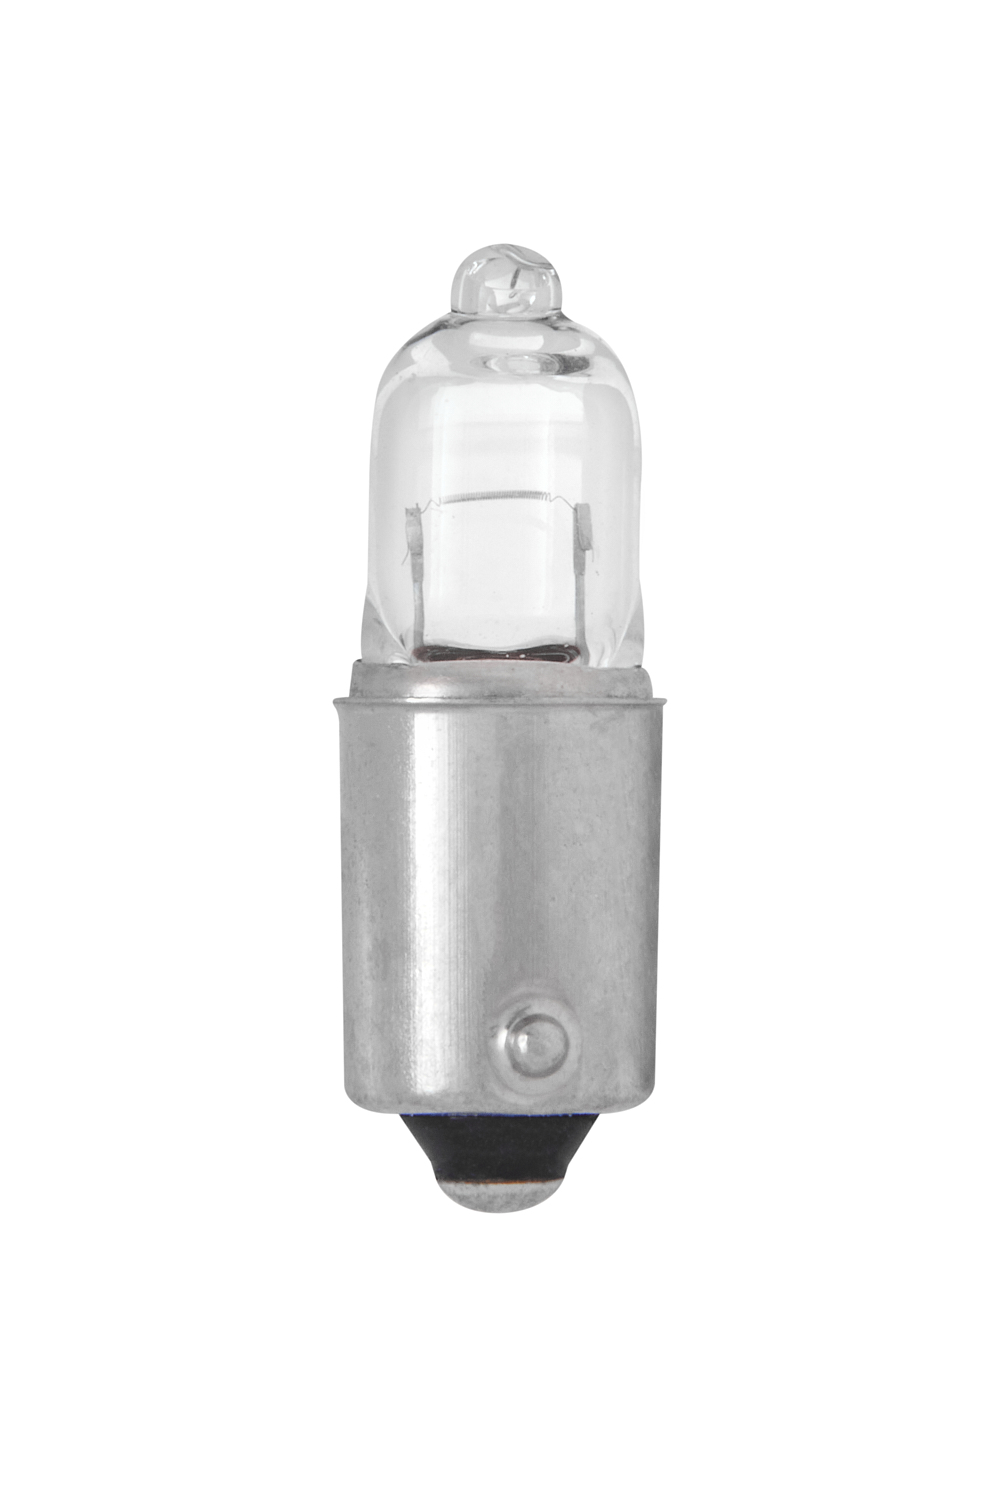 12V 6W H6W BAX9s Halogen Side and Tail bulb, R434